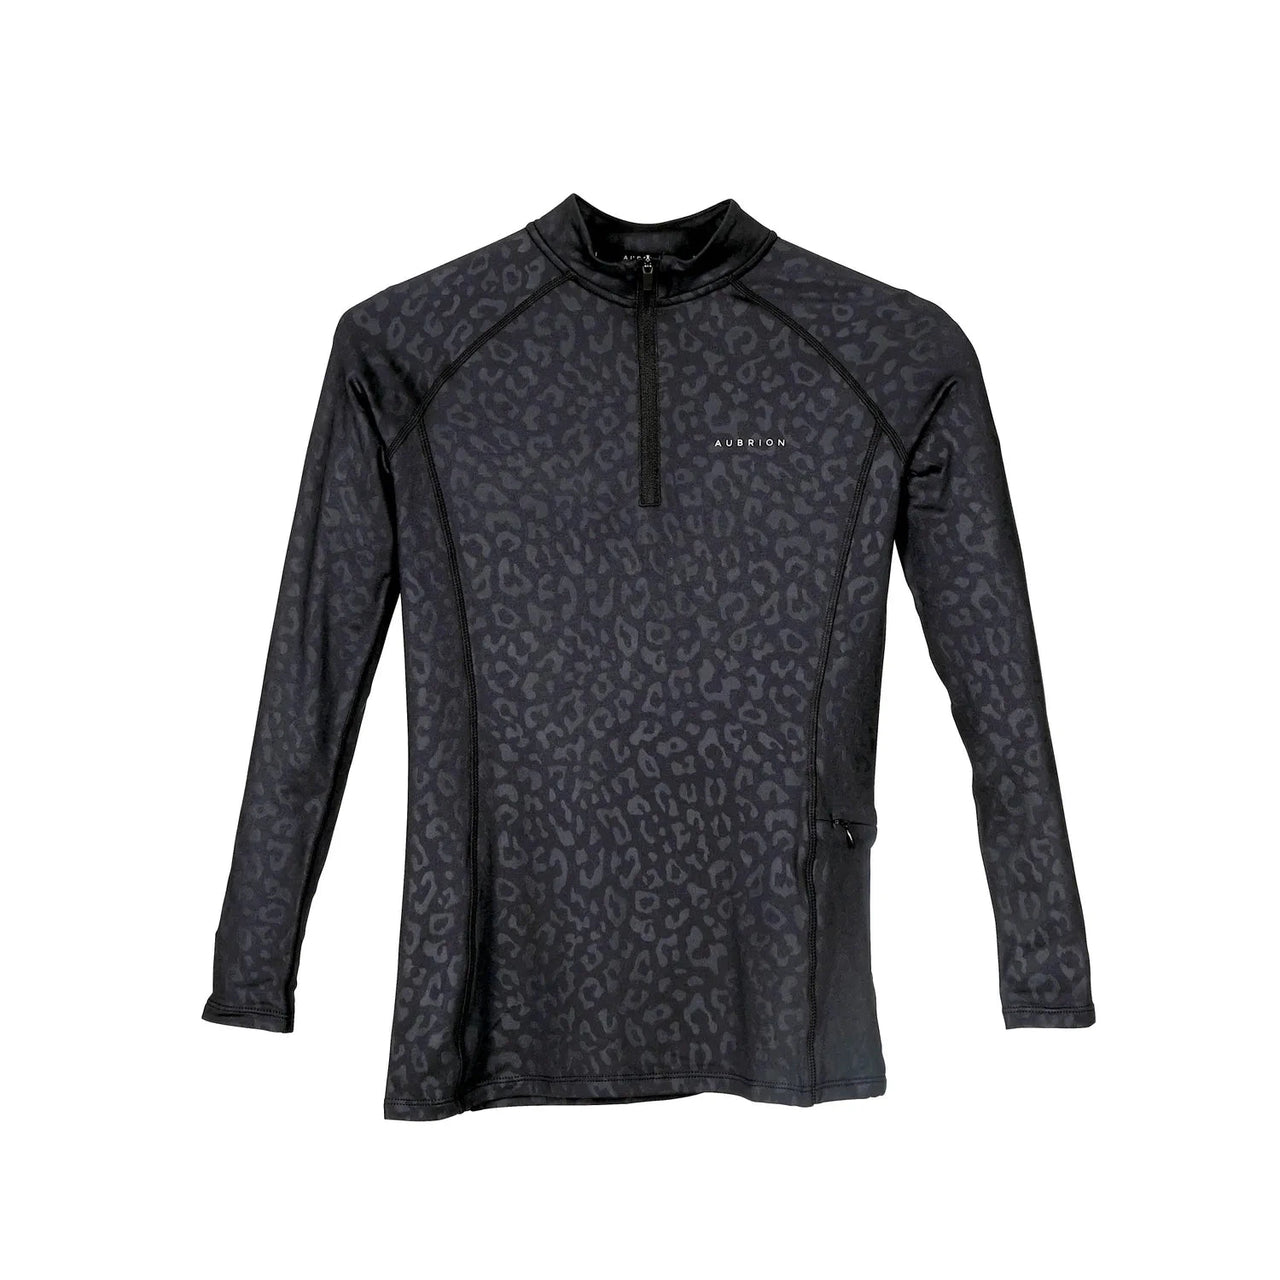 Aubrion Youth Revive Winter Base Layer